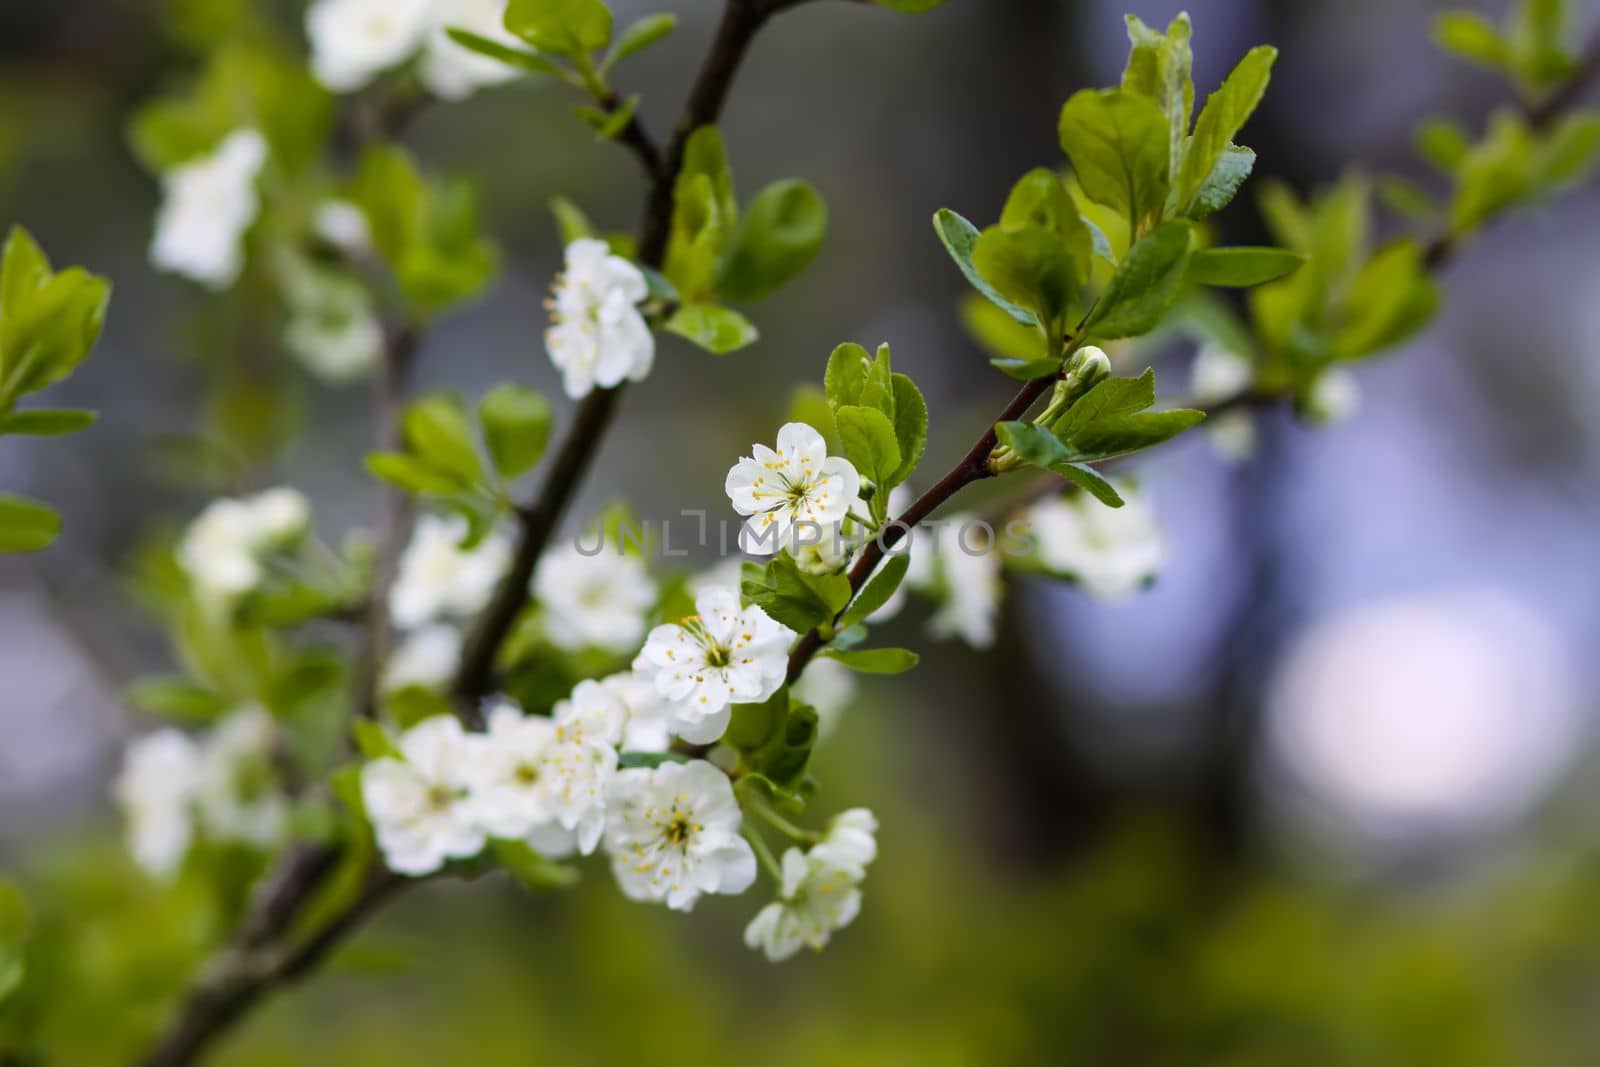 Plum tree blossoms in spring park. Beautiful nature background. Springtime in countryside. by nightlyviolet